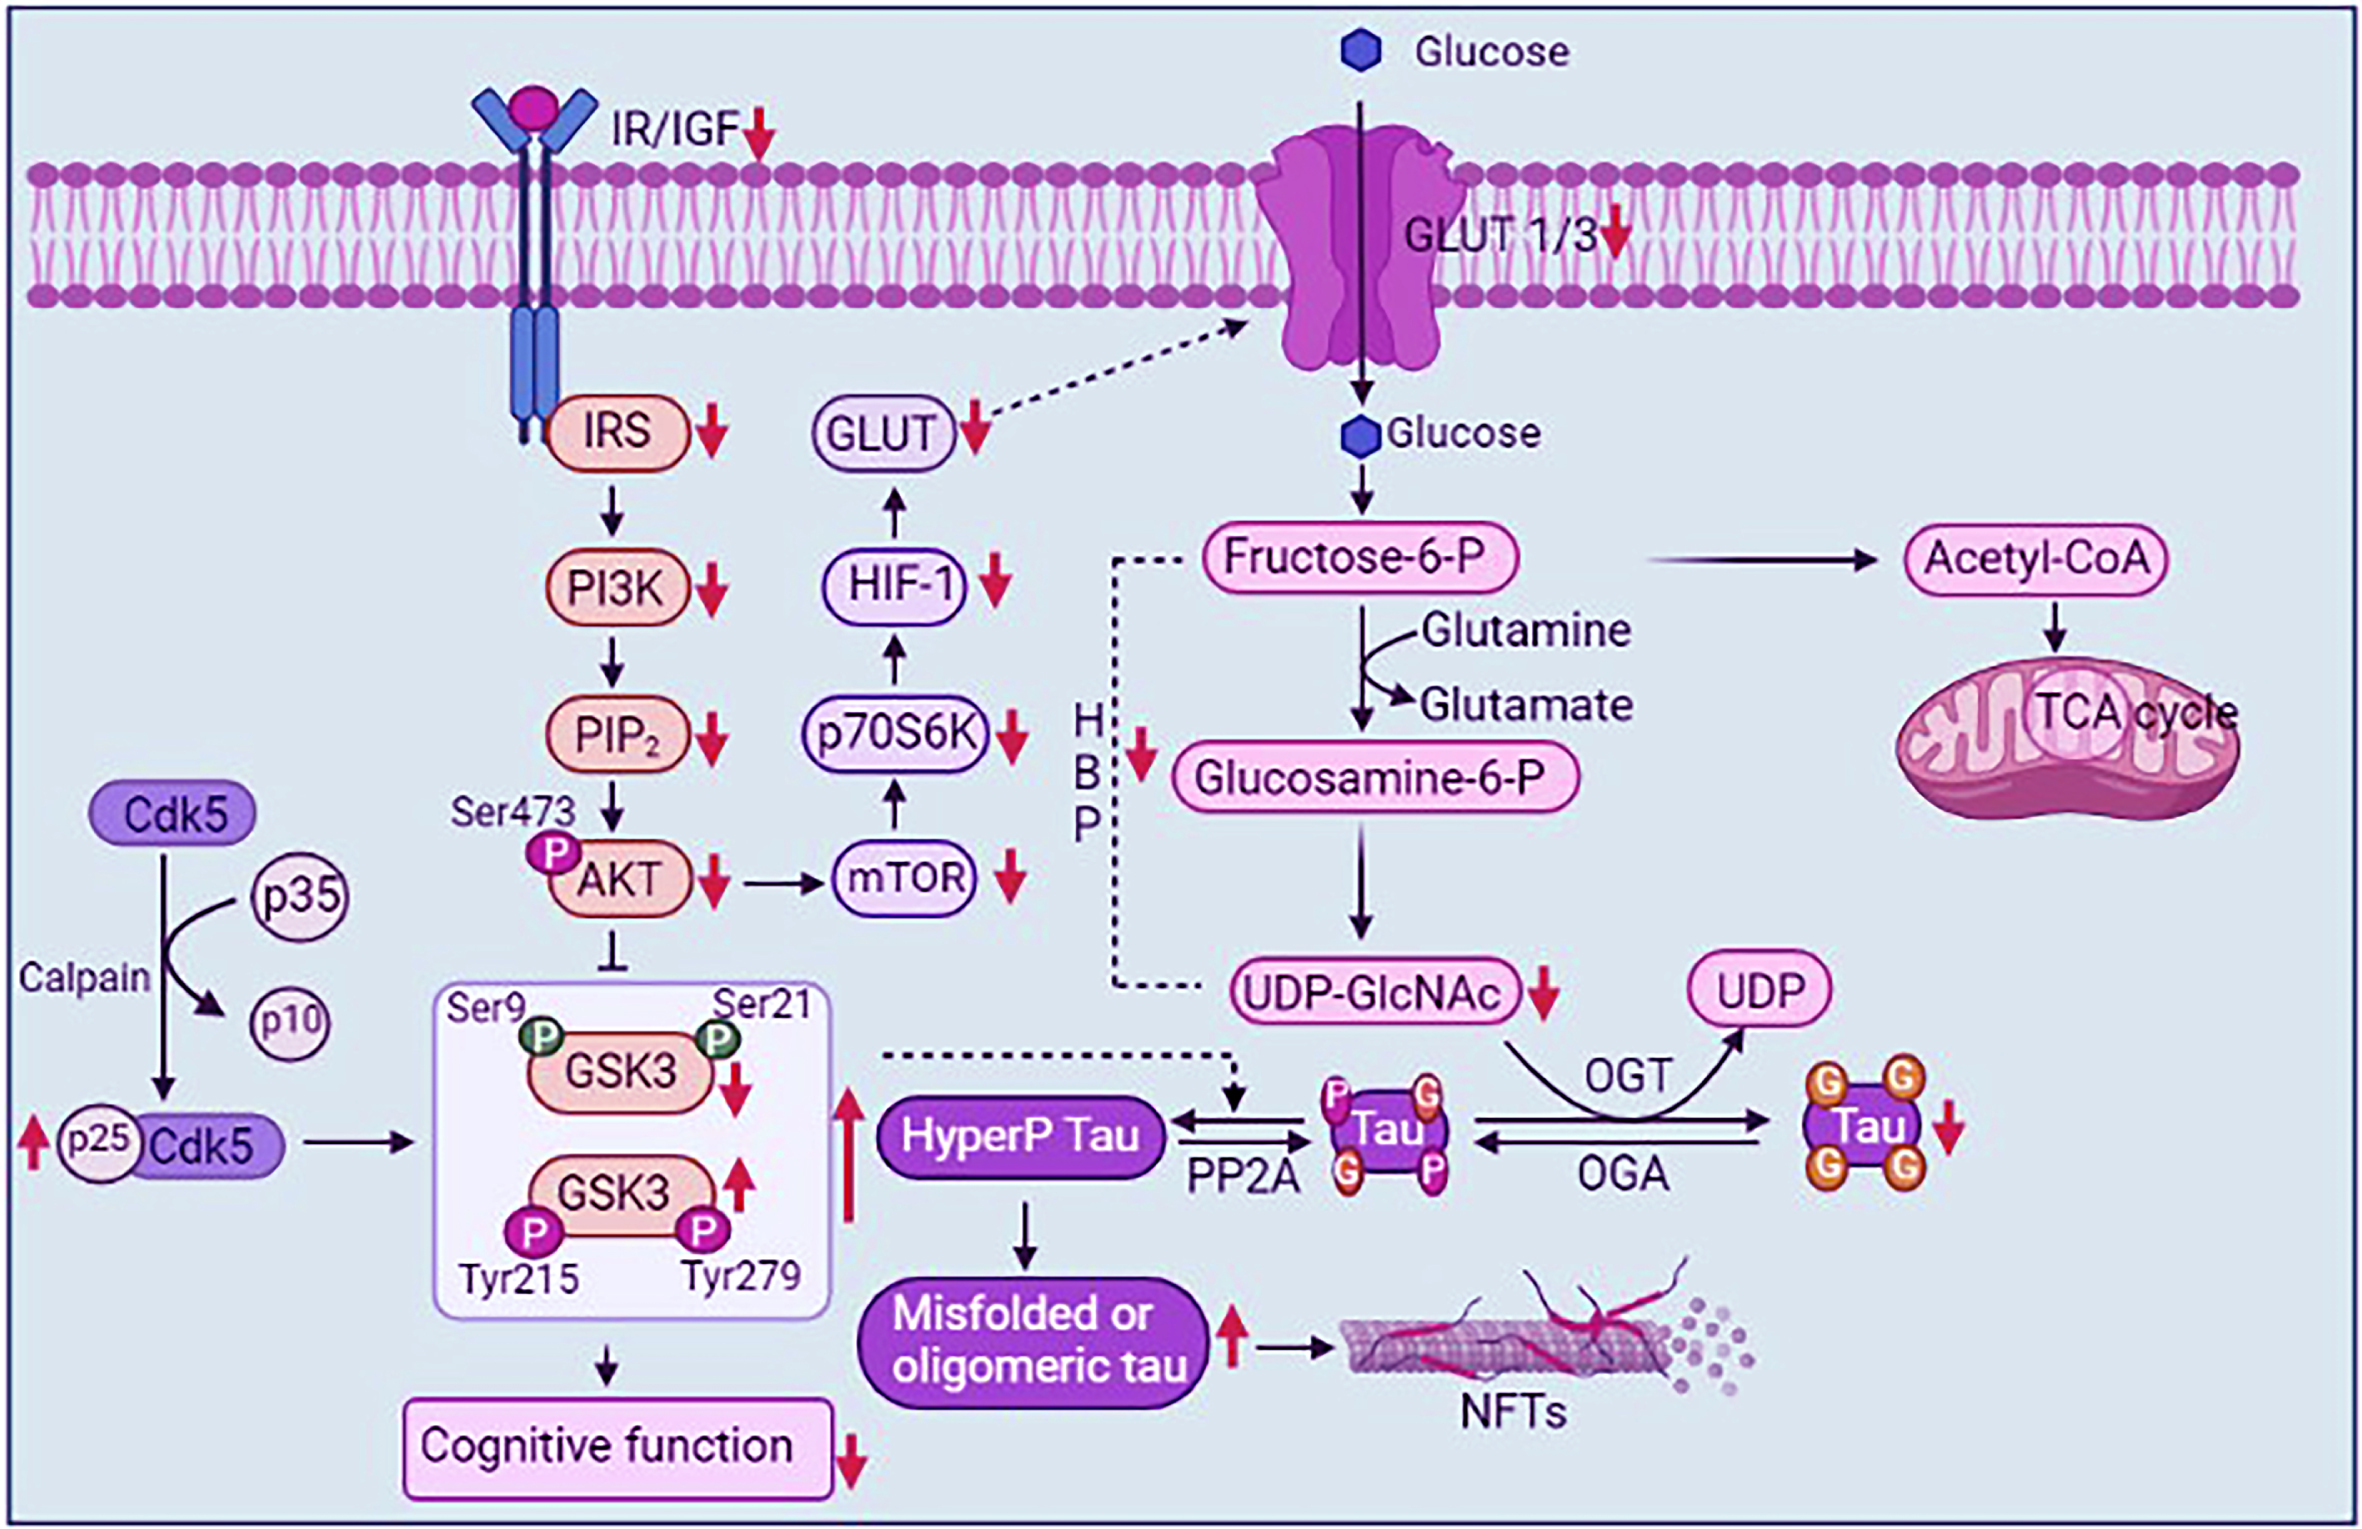 Regulation of PI3K/Akt signaling in Alzheimer’s disease (AD) and ischemic stroke (IS). In both of the diseases, PI3K/Akt signaling is dysregulated by the reduced protein expression levels of insulin signaling related proteins such as IR, IRS, PI3K, PIP2, and Akt. The downstream signaling proteins such as GSK3 is over activated and Cdk5/p25 pathway leads to tau hyperphosphorylation in AD. In AD and IS, insulin resistance in the brain diminishes the glucose receptor GLUT4, and due to impaired PI3k/Akt signaling pathway, the glucose receptors such as GLUT 1, 2, and 3 may reduce in the brain, causing the decrease of glucose metabolism. In addition, lower levels of glucose reduce UDP-GlcNAc concentration via the hexosamine biosynthetic pathway (HBP) and subsequently diminished tau O-GlcNAcylation. Reduced O-GlcNAcylation helps in tau hyperphosphorylation, tau oligomerization and ultimately neurofibrillary tangles are produced in AD [73]. Akt, protein kinase B; CdK 5, cyclin-dependent kinase 5; Fructose-6-p, fructose-6-phosphate; GlcNAc, β-N-acetylglucosamine; Glucosamine-6-P, glucosamine-6-Phosphate; GLUT, glucose transporter; GSK3, glycogen synthetase kinases 3; HBP, hexosamine biosynthetic pathway; HIF-1, hypoxia inducible factor-1; IGF, insulin growth factor; IR, insulin receptor; IRS, insulin receptor substrate; m-TOR, mammalian target of rapamycin; NFTs, neurofibrillary tangles; OGA, O-GlcNAcase; OGT, O-GlcNAc transferase; P, phosphate group; p70S6K, ribosomal protein S6 kinase with a molecular weight of 70 kD; PI3K, phosphatidylinositol 3-kinase; PIP2, phosphatidylinositol (3,4)-bisphosphate; TCA, tricarboxylic acid cycle; UDP, uridine diphosphate.